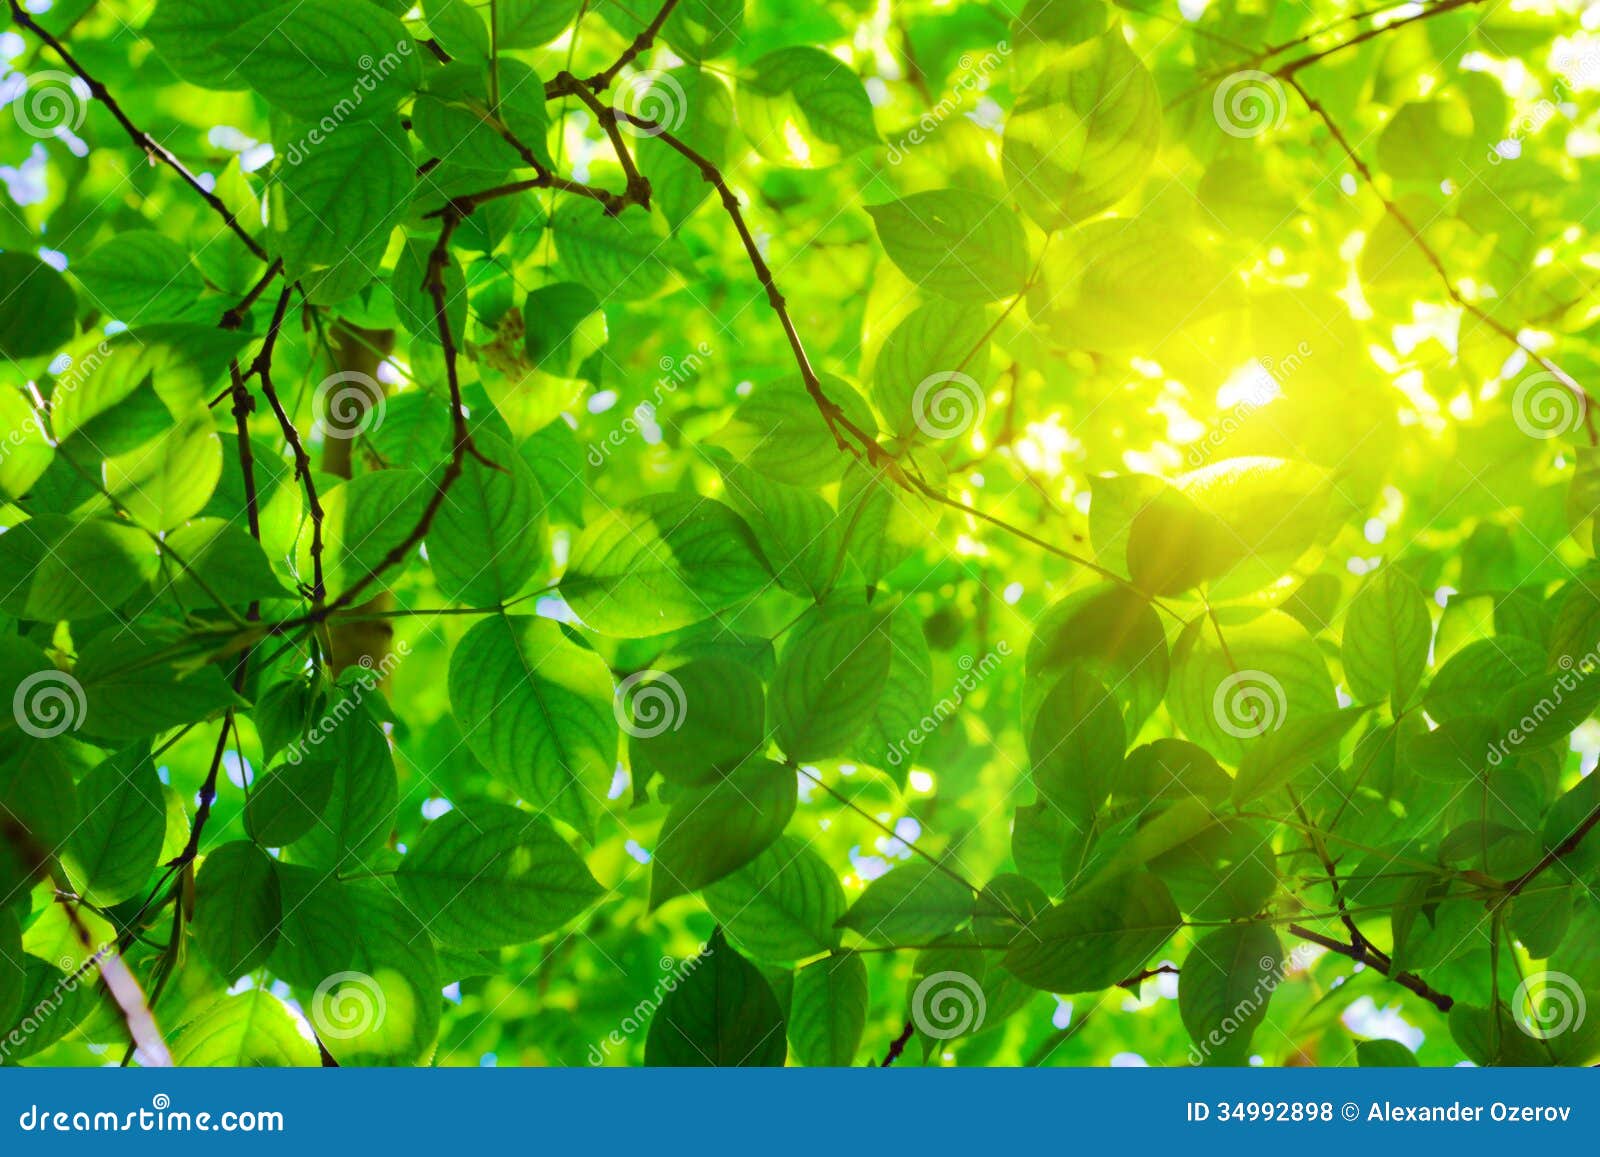 Green leaves and sun stock photo. Image of sunlight, branch - 34992898